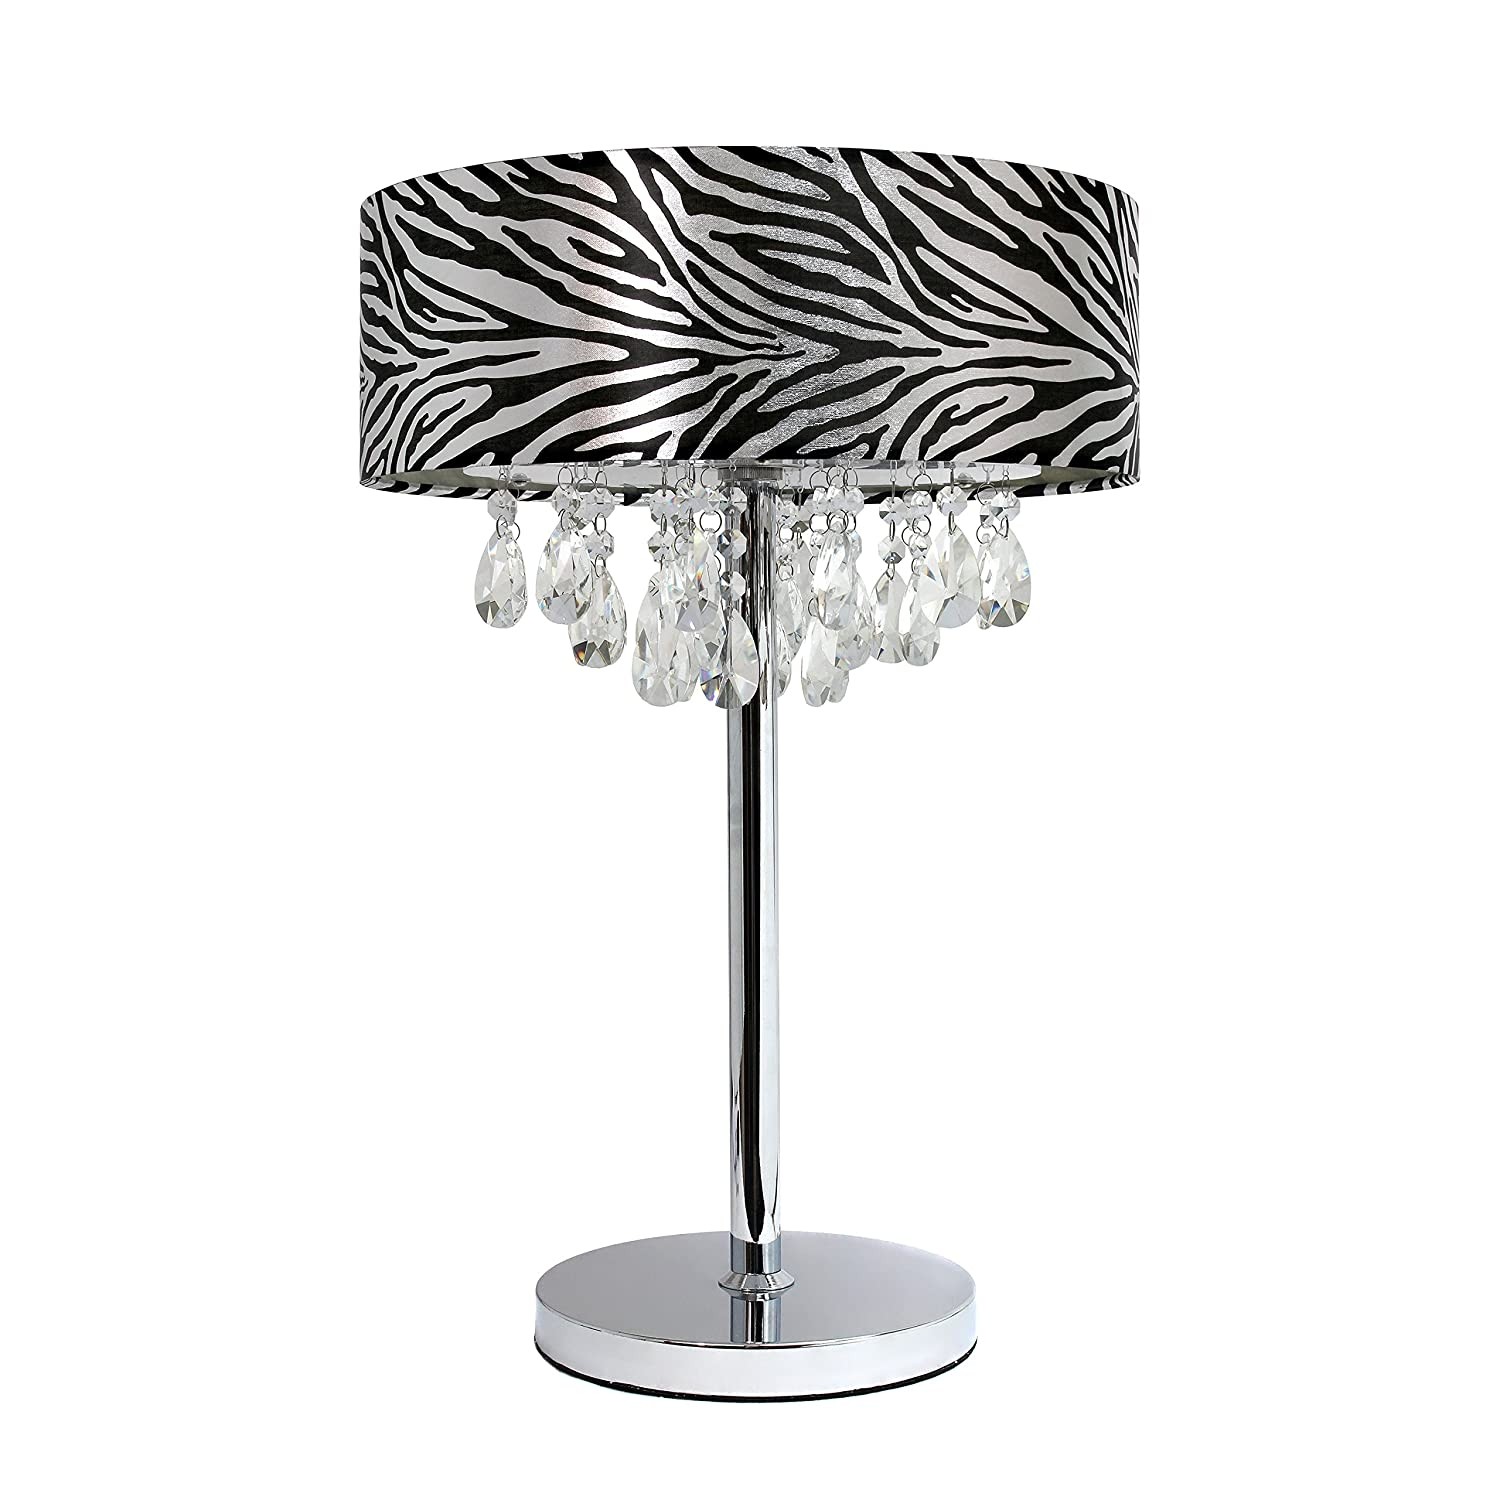 Best animal print replacement lamp shades for table lamps 1